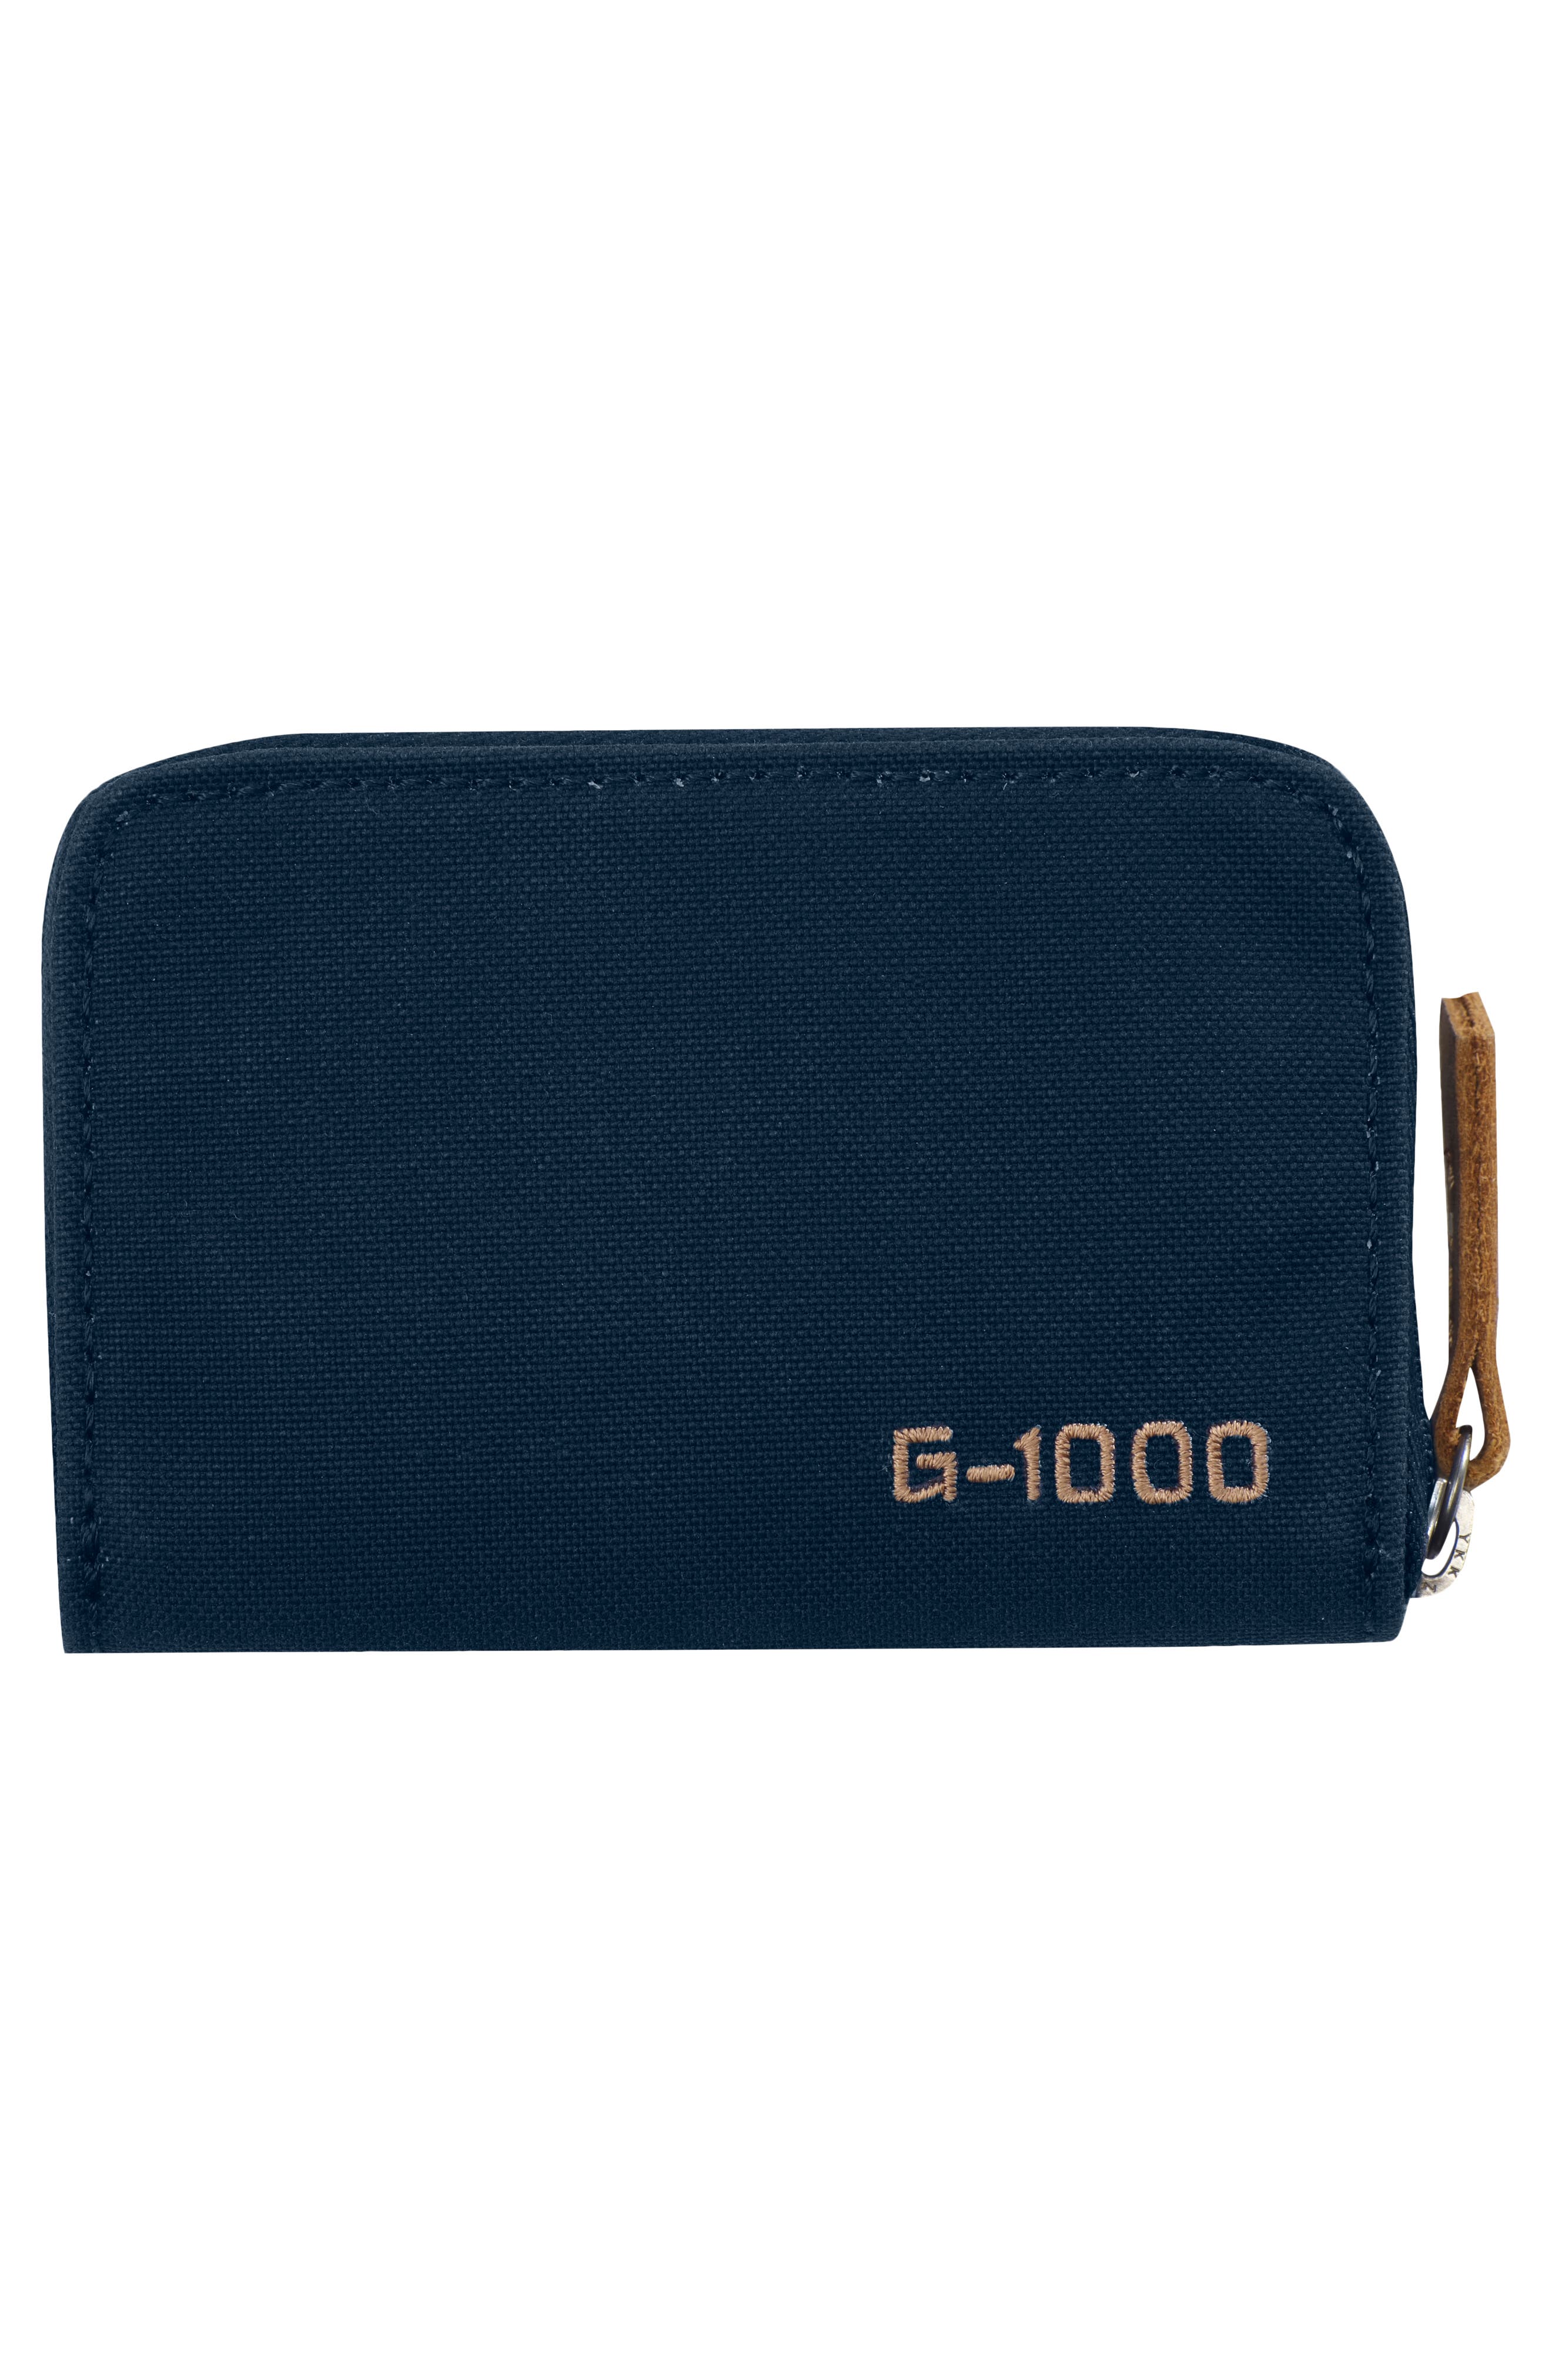 Fjallraven Leather Zip Wallet in Navy for Men Mens Accessories Wallets and cardholders Blue 